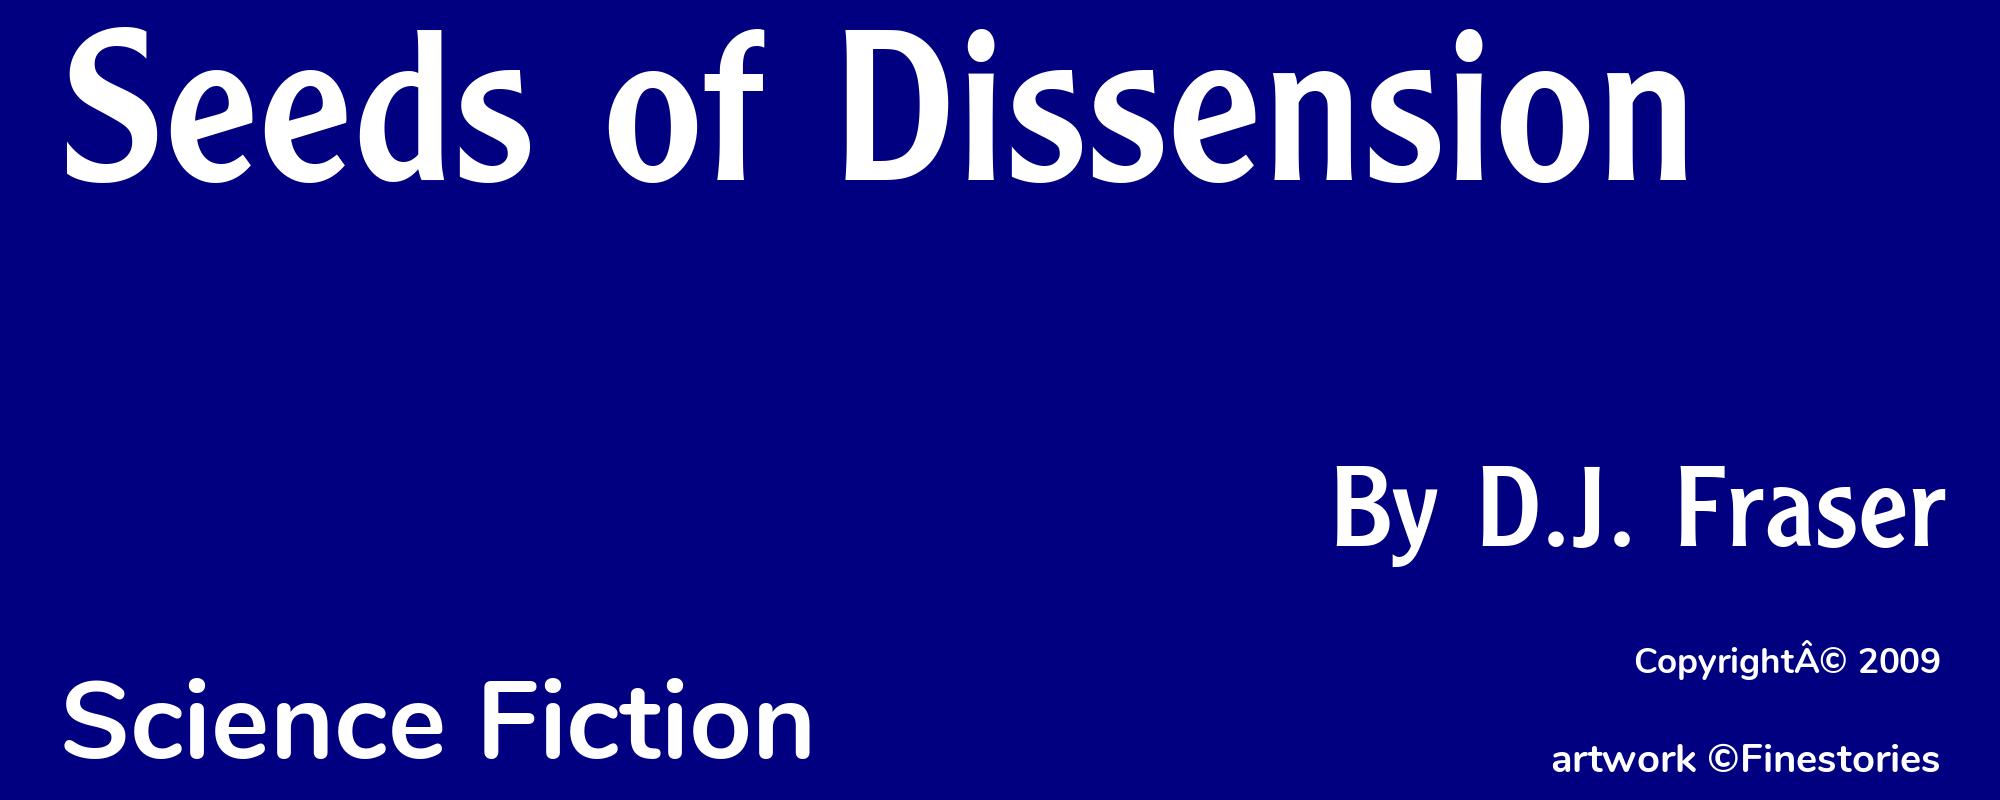 Seeds of Dissension - Cover